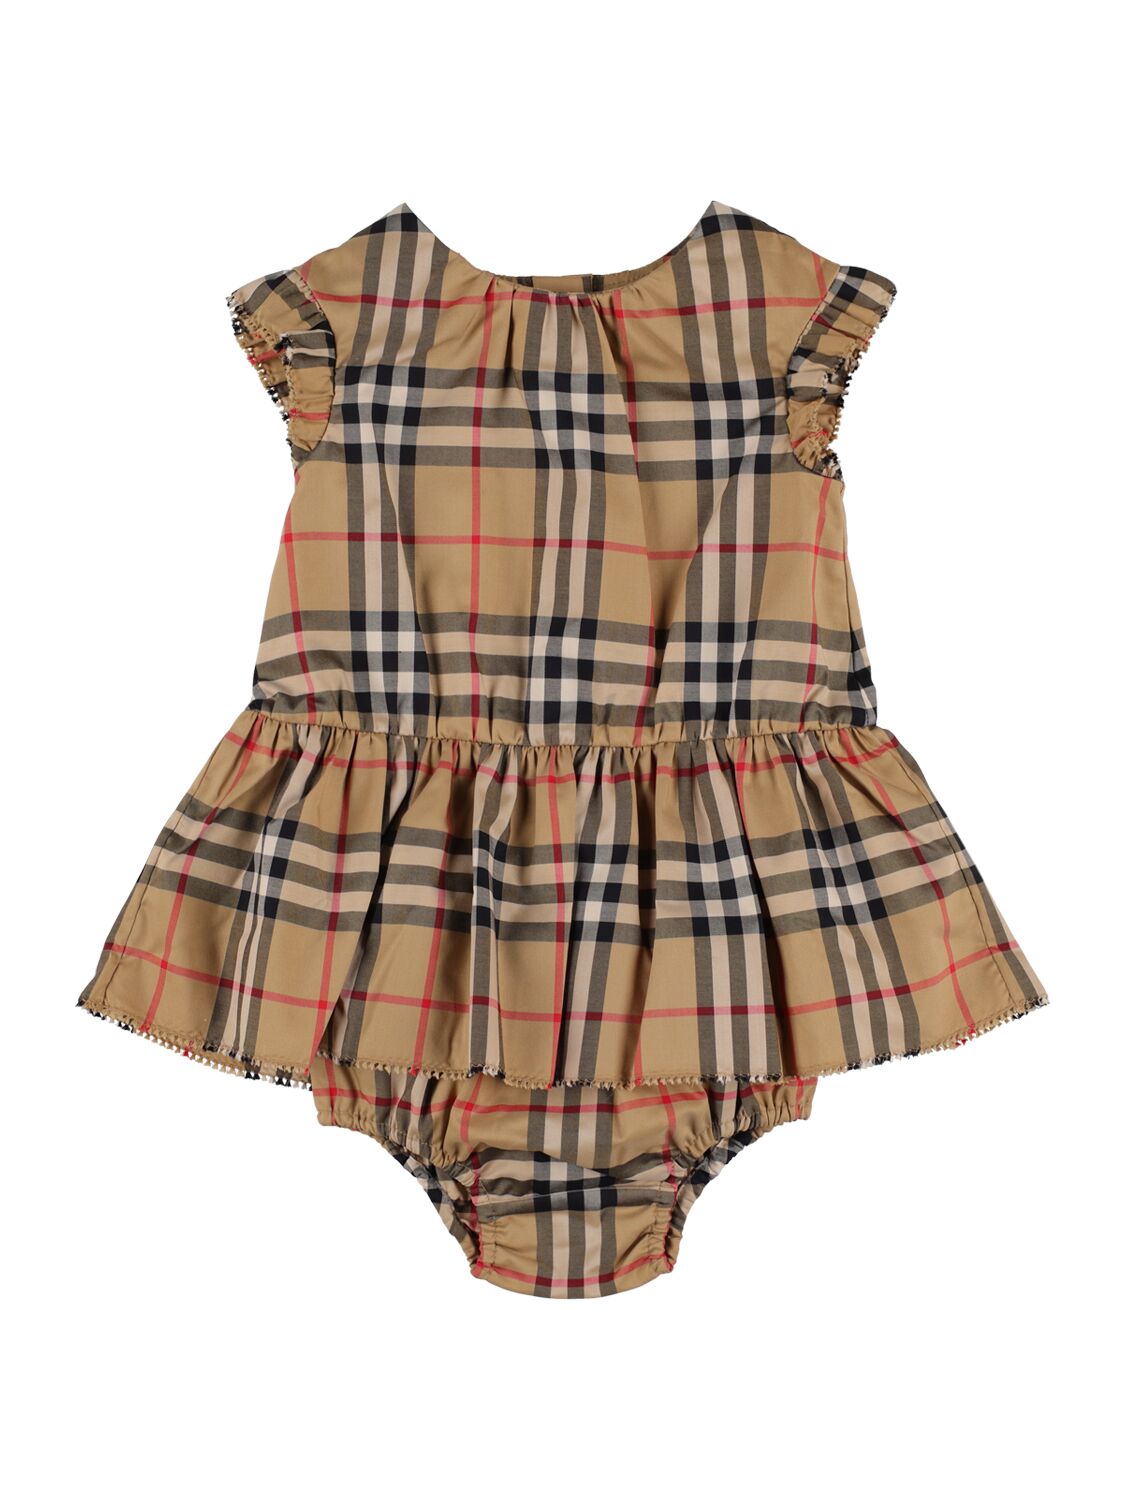 Burberry Babies' Check Print Cotton Dress & Diaper Cover In Neutral